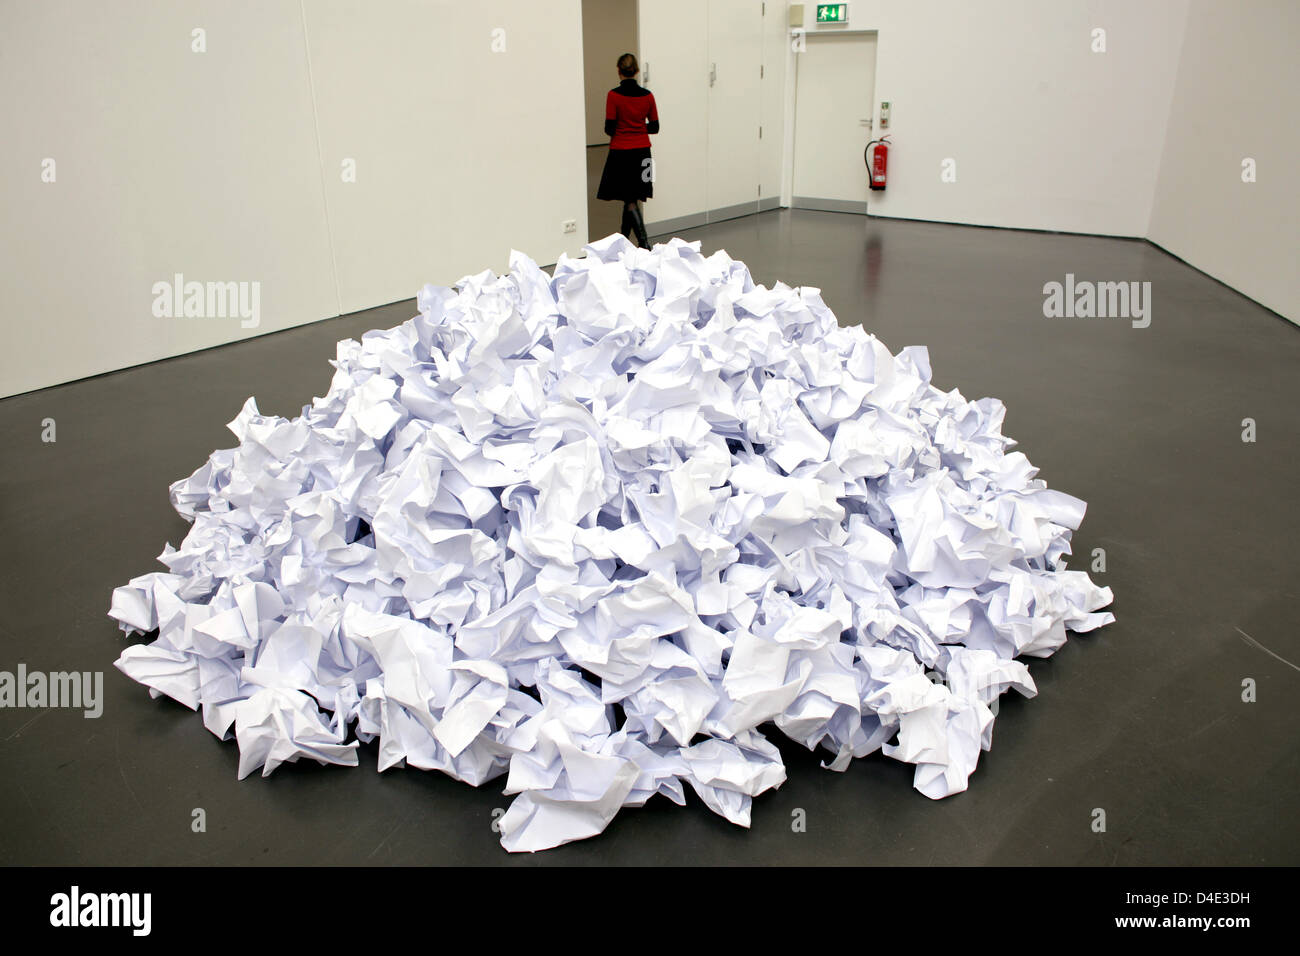 The installation 'White Paperpile' dating 1979 by German sculptor Reiner Ruthenbeck is on display at the Art Hall of Duesseldorf, Germany, 09 October 2008. Art Hall Duesseldorf puts the works of Ruthenbeck, mostly distinguished by conceptual and space-oriented thinking, on display from 12 October 2008 to 11 January 2009. Photo: ROLF VENNENBERND Stock Photo